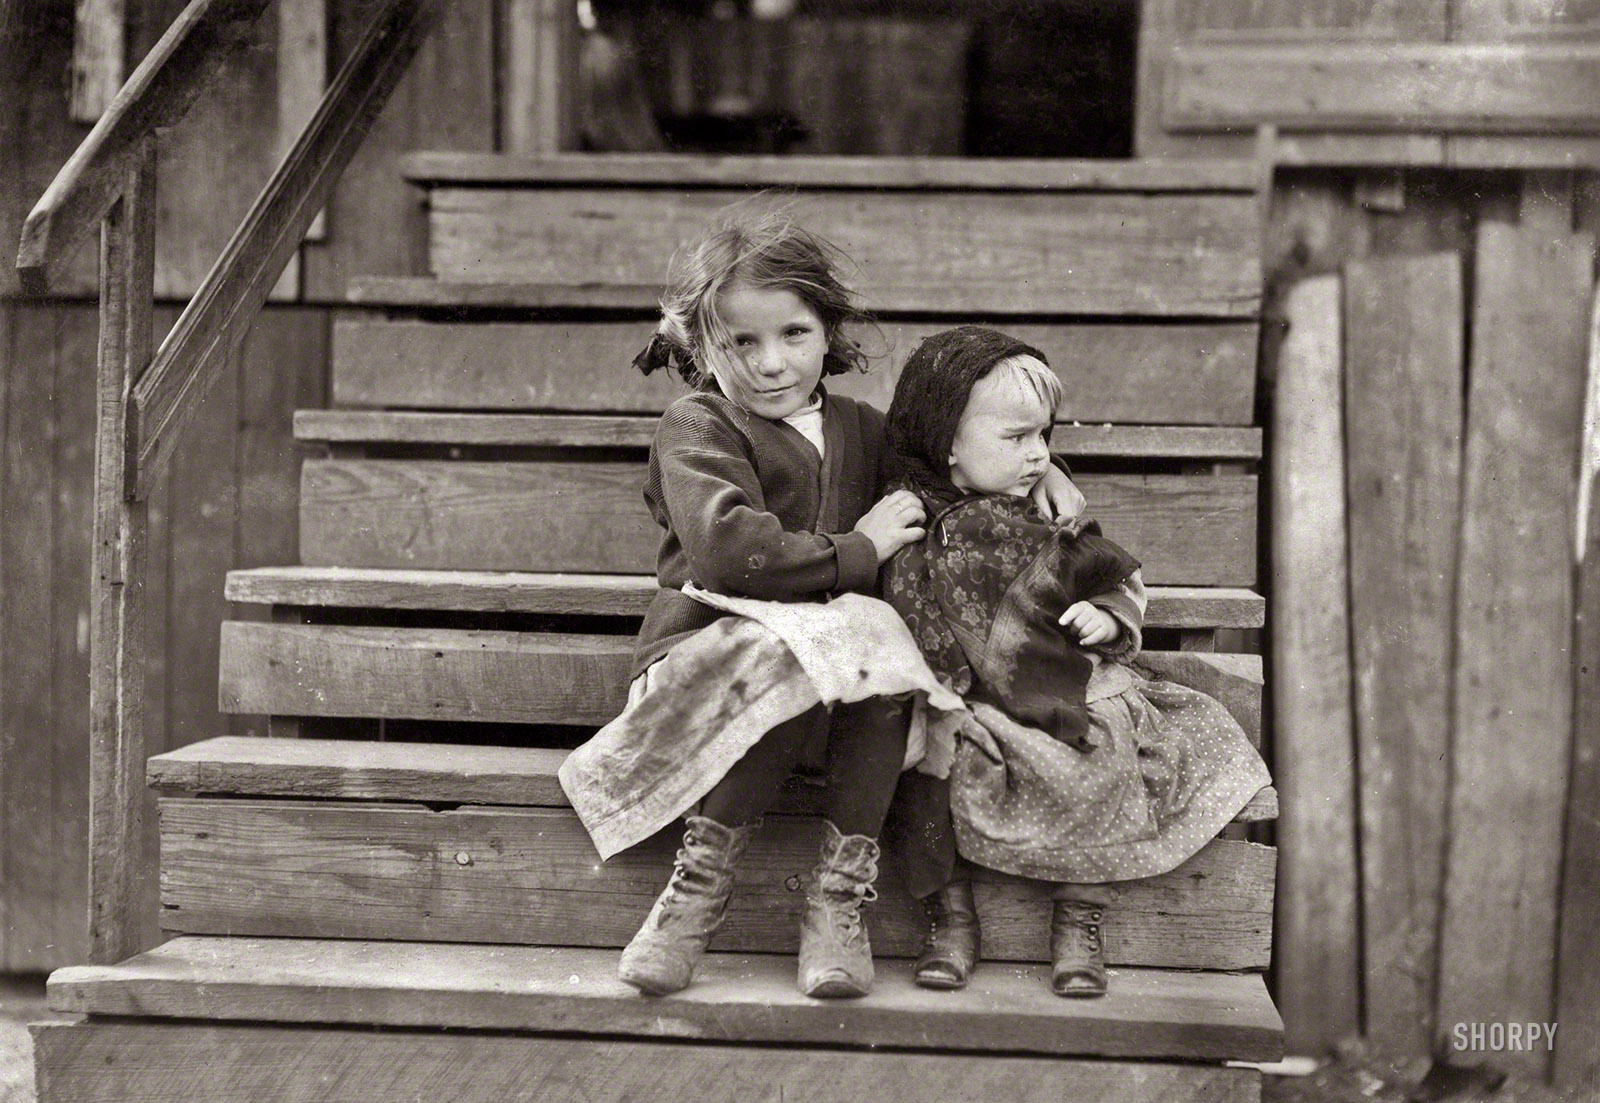 February 1911. Bayou La Batre, Alabama. "Little Julia tending the baby at home. All the older ones are at the factory. She shucks [oysters] also. Alabama Canning Co." Photograph by Lewis Wickes Hine. View full size.